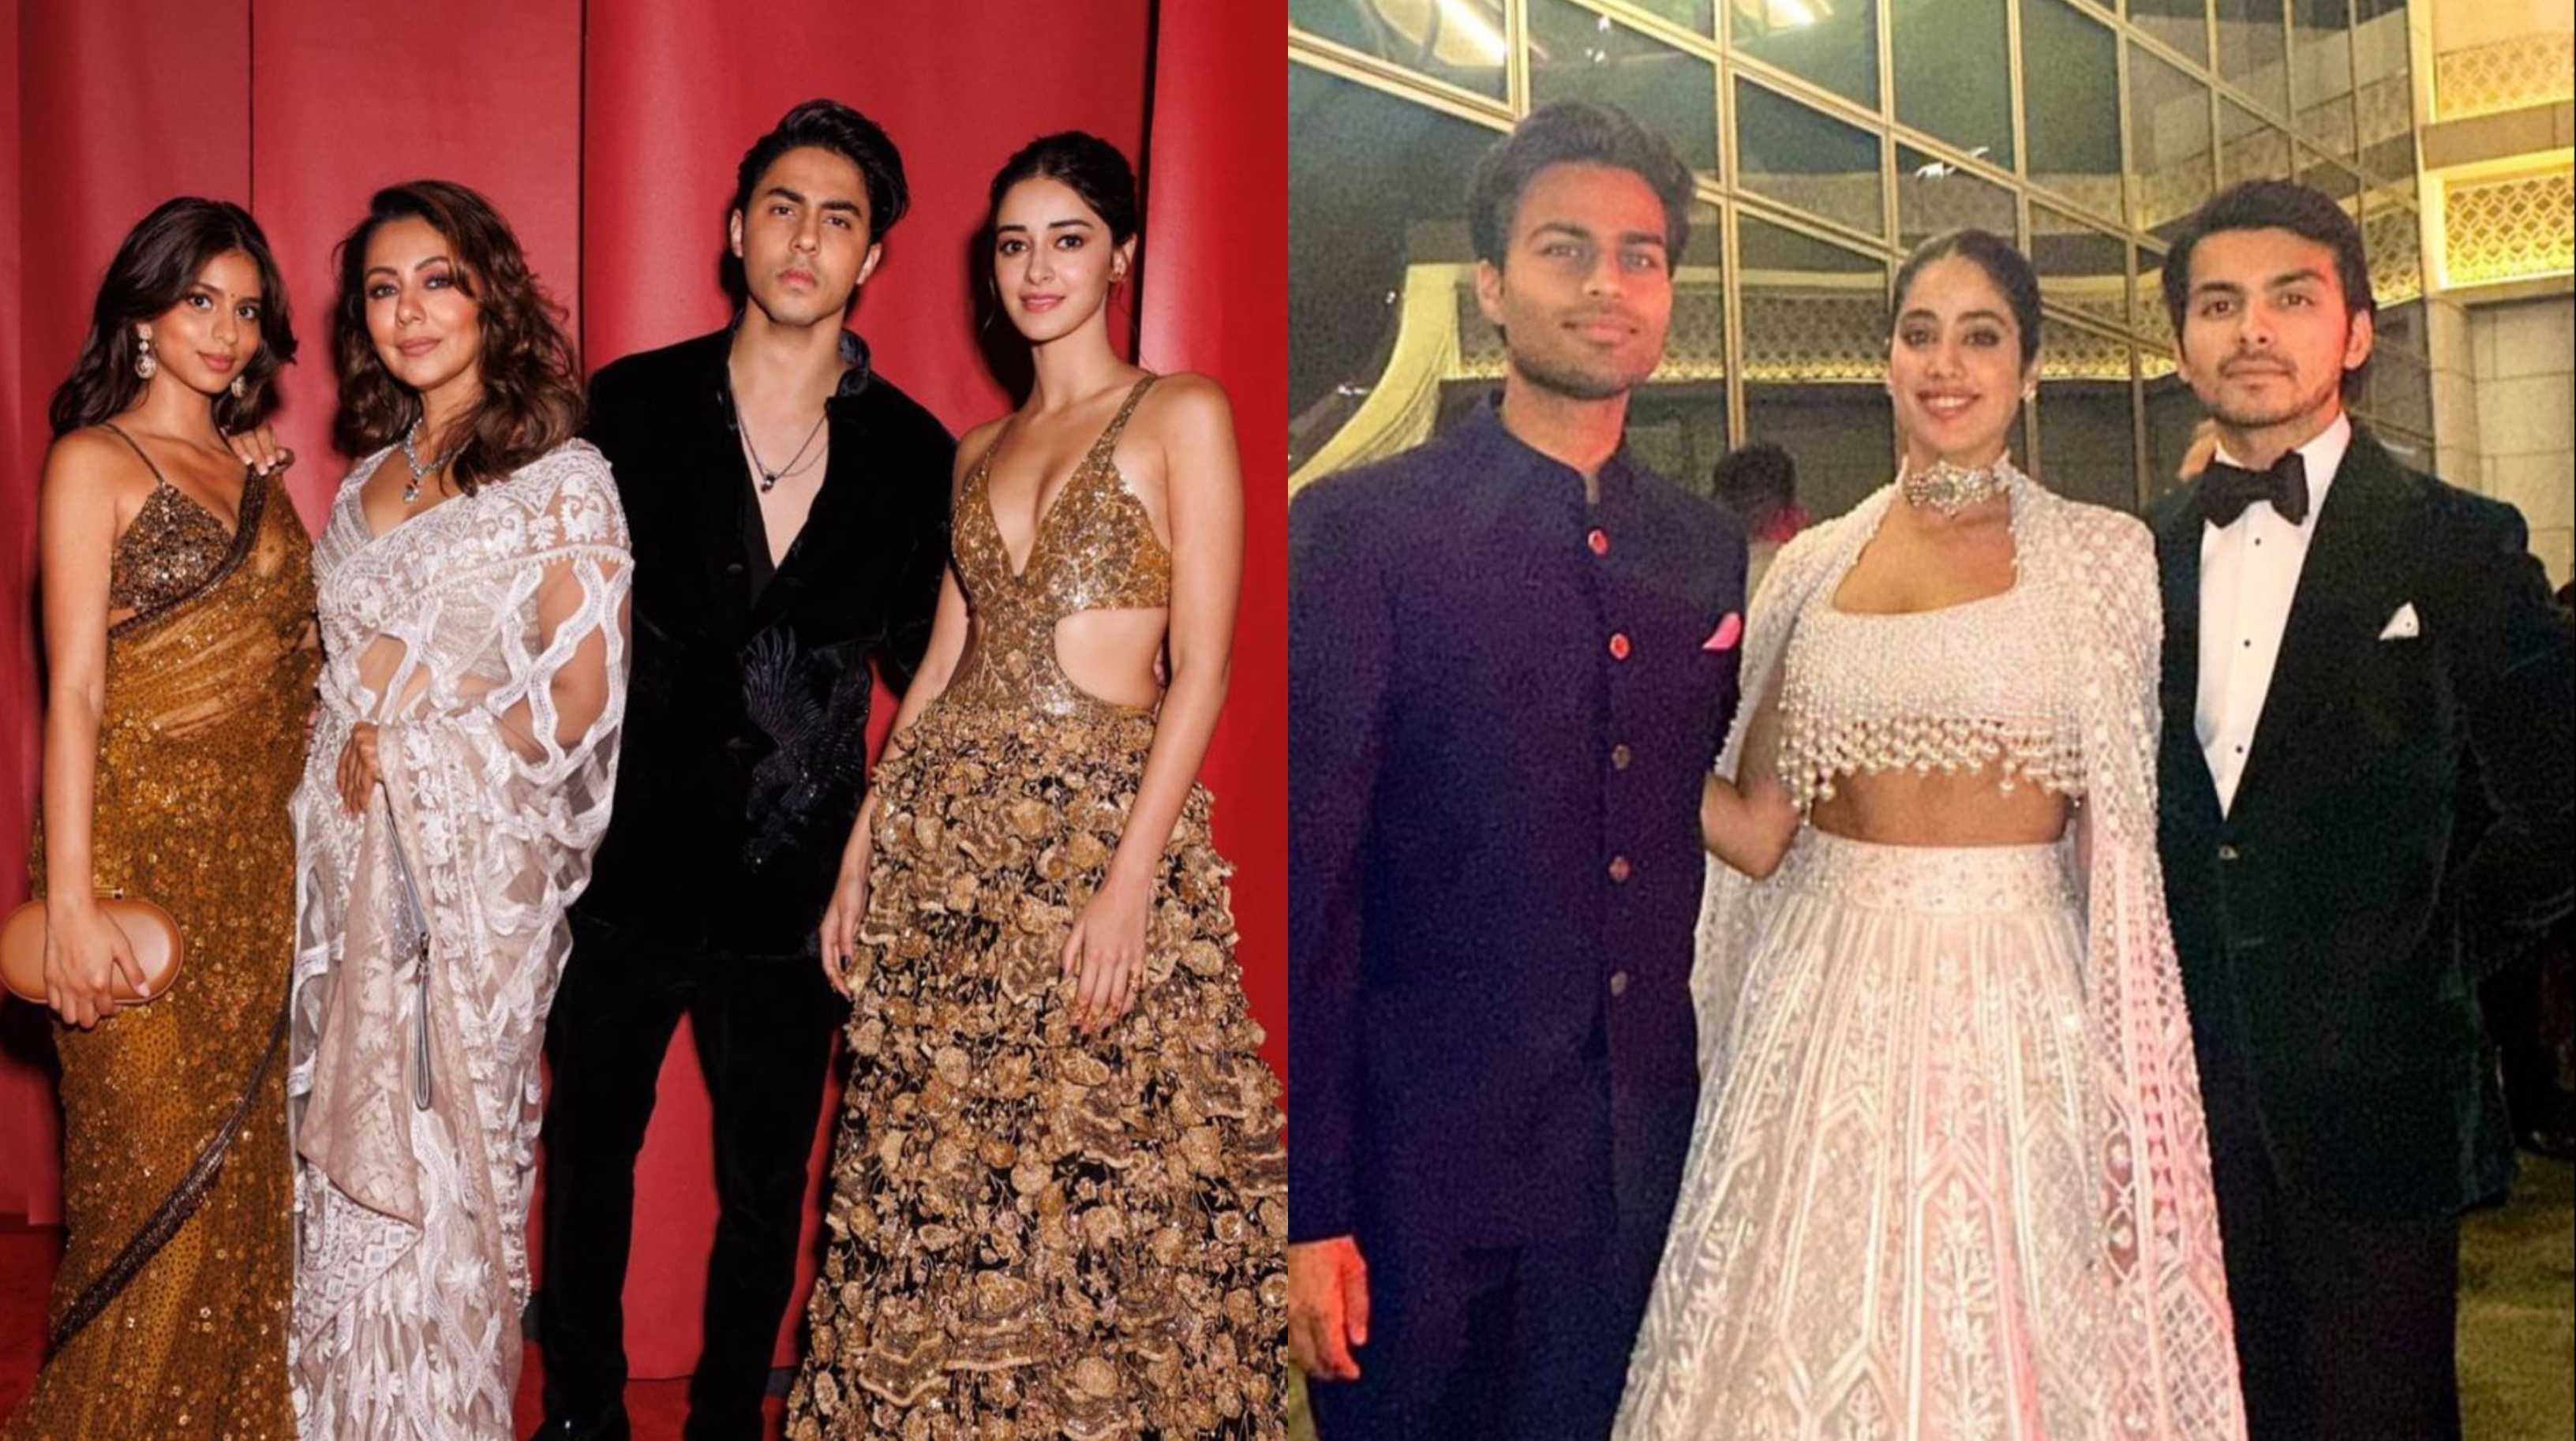 Ananya joins Aryan Khan for a family photo, Janhvi & Shikhar spend time together in unseen pics from Ambani’s event